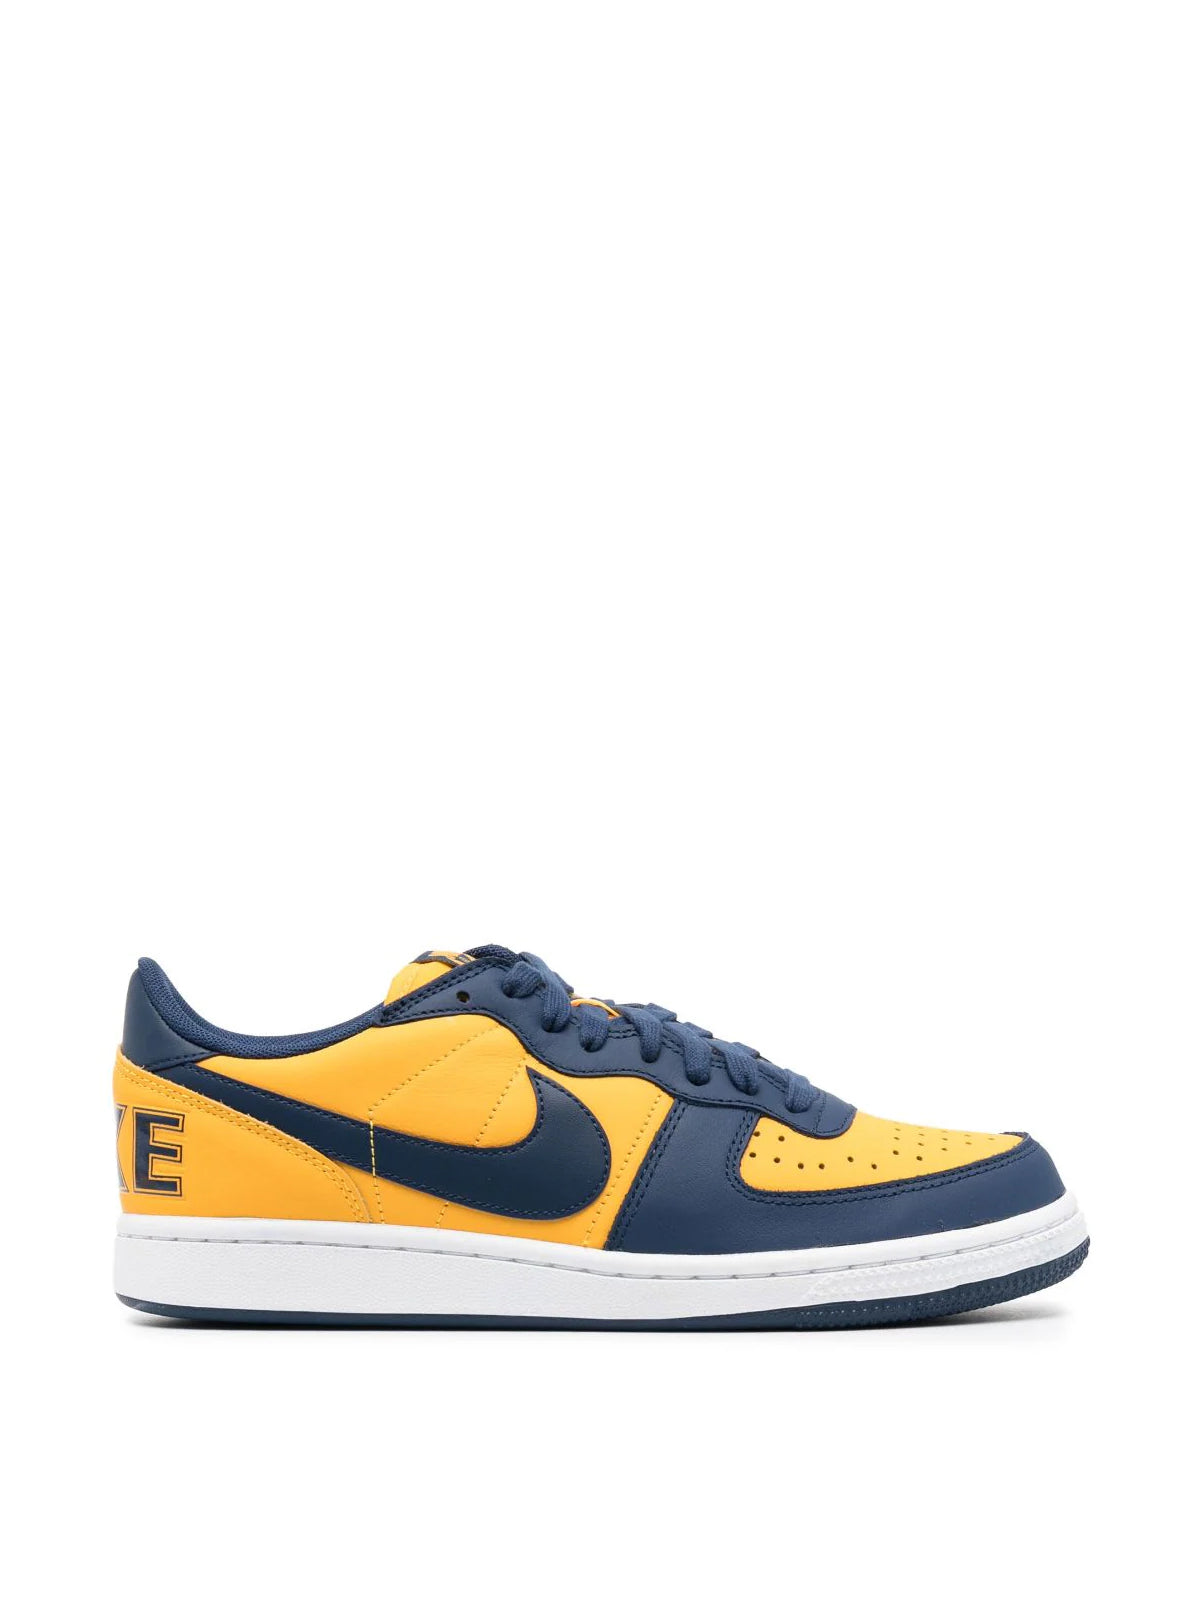 Nike-OUTLET-SALE-Terminator Low 'Michigan' Sneakers-ARCHIVIST